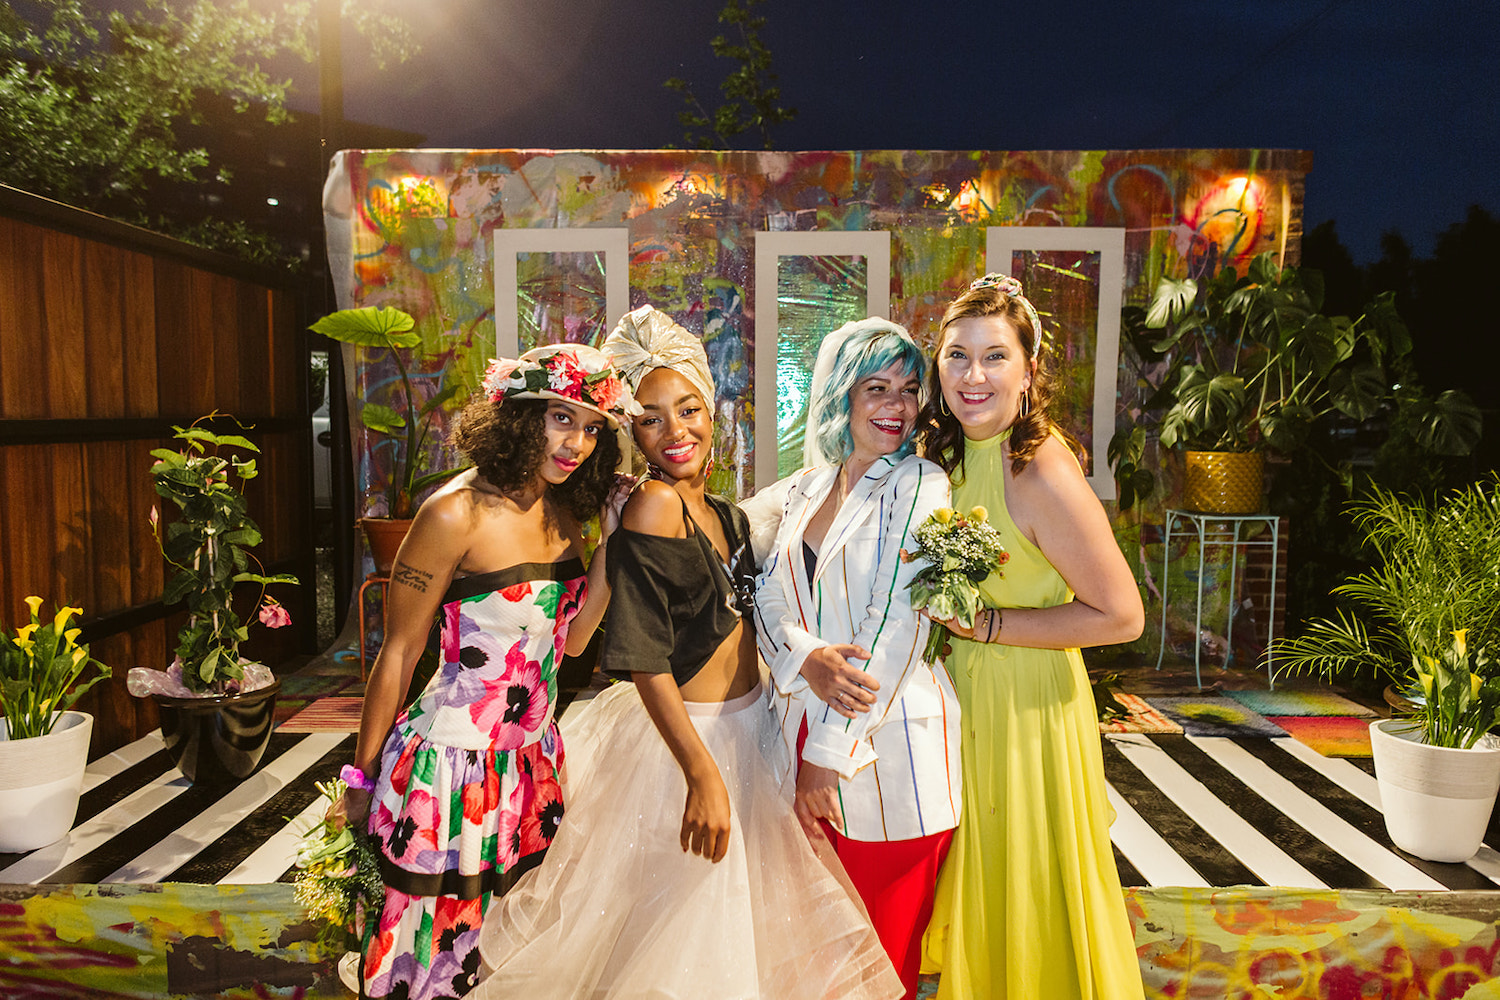 two brides and two bridesmaids wear bright, colorful wedding attire on an artistically painted platform and backdrop